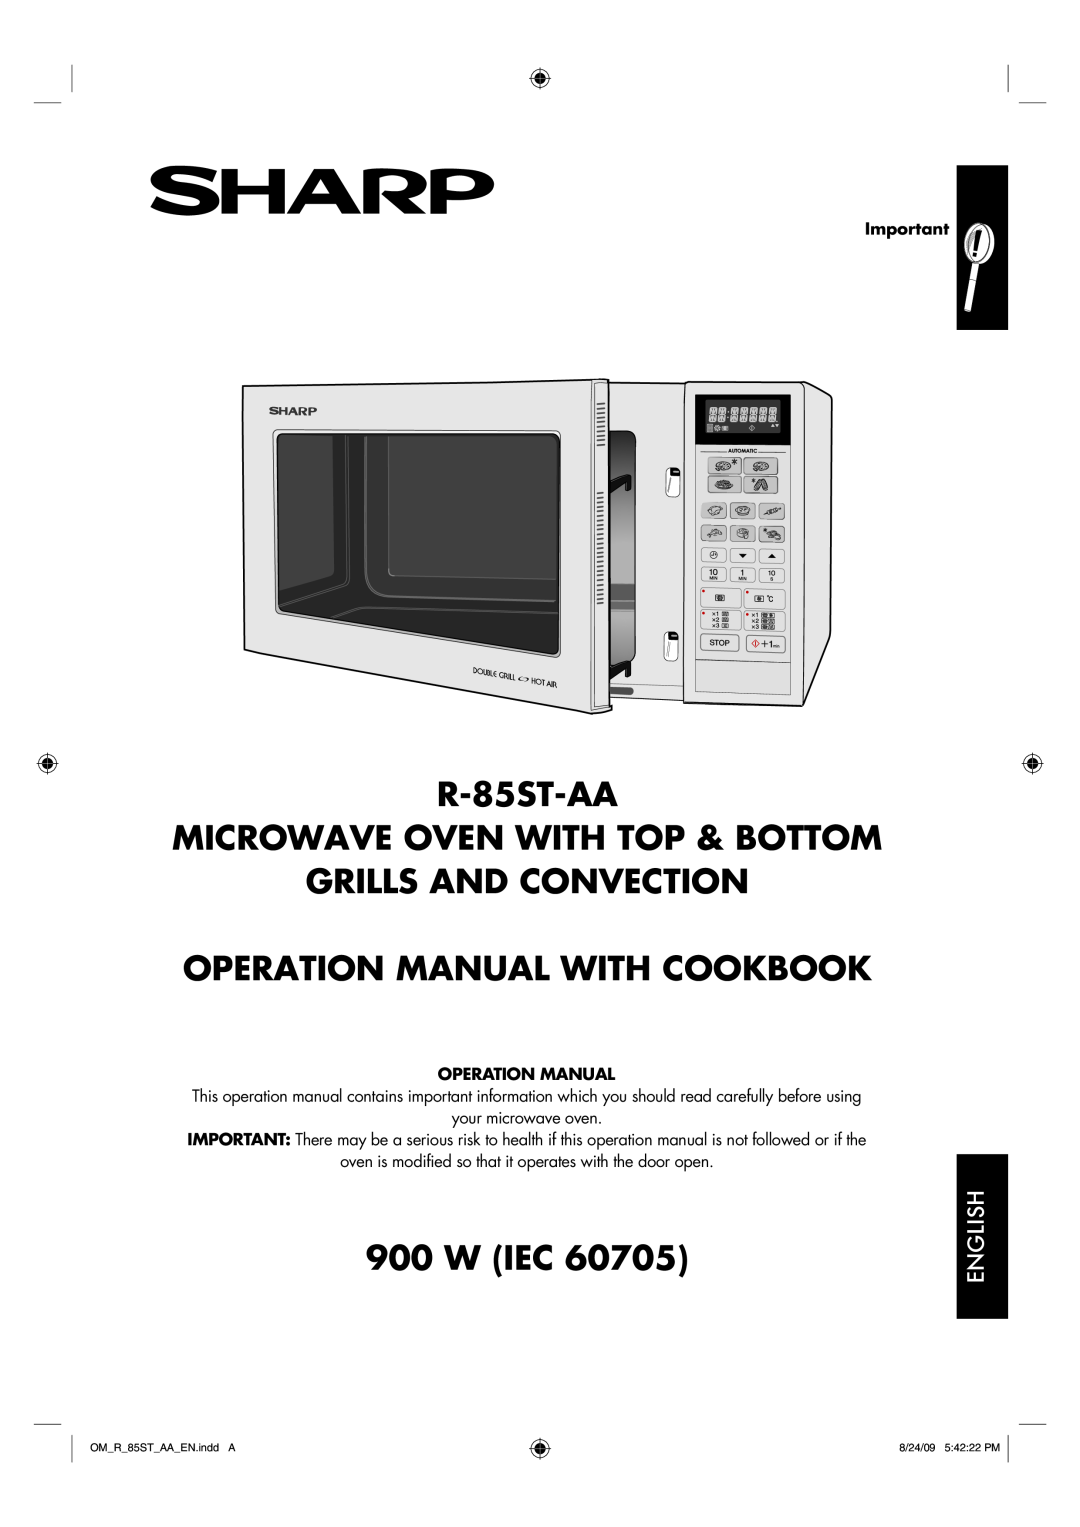 Sharp operation manual English, R-85ST-AA MICROWAVE OVEN WITH TOP & BOTTOM GRILLS AND CONVECTION, W Iec 